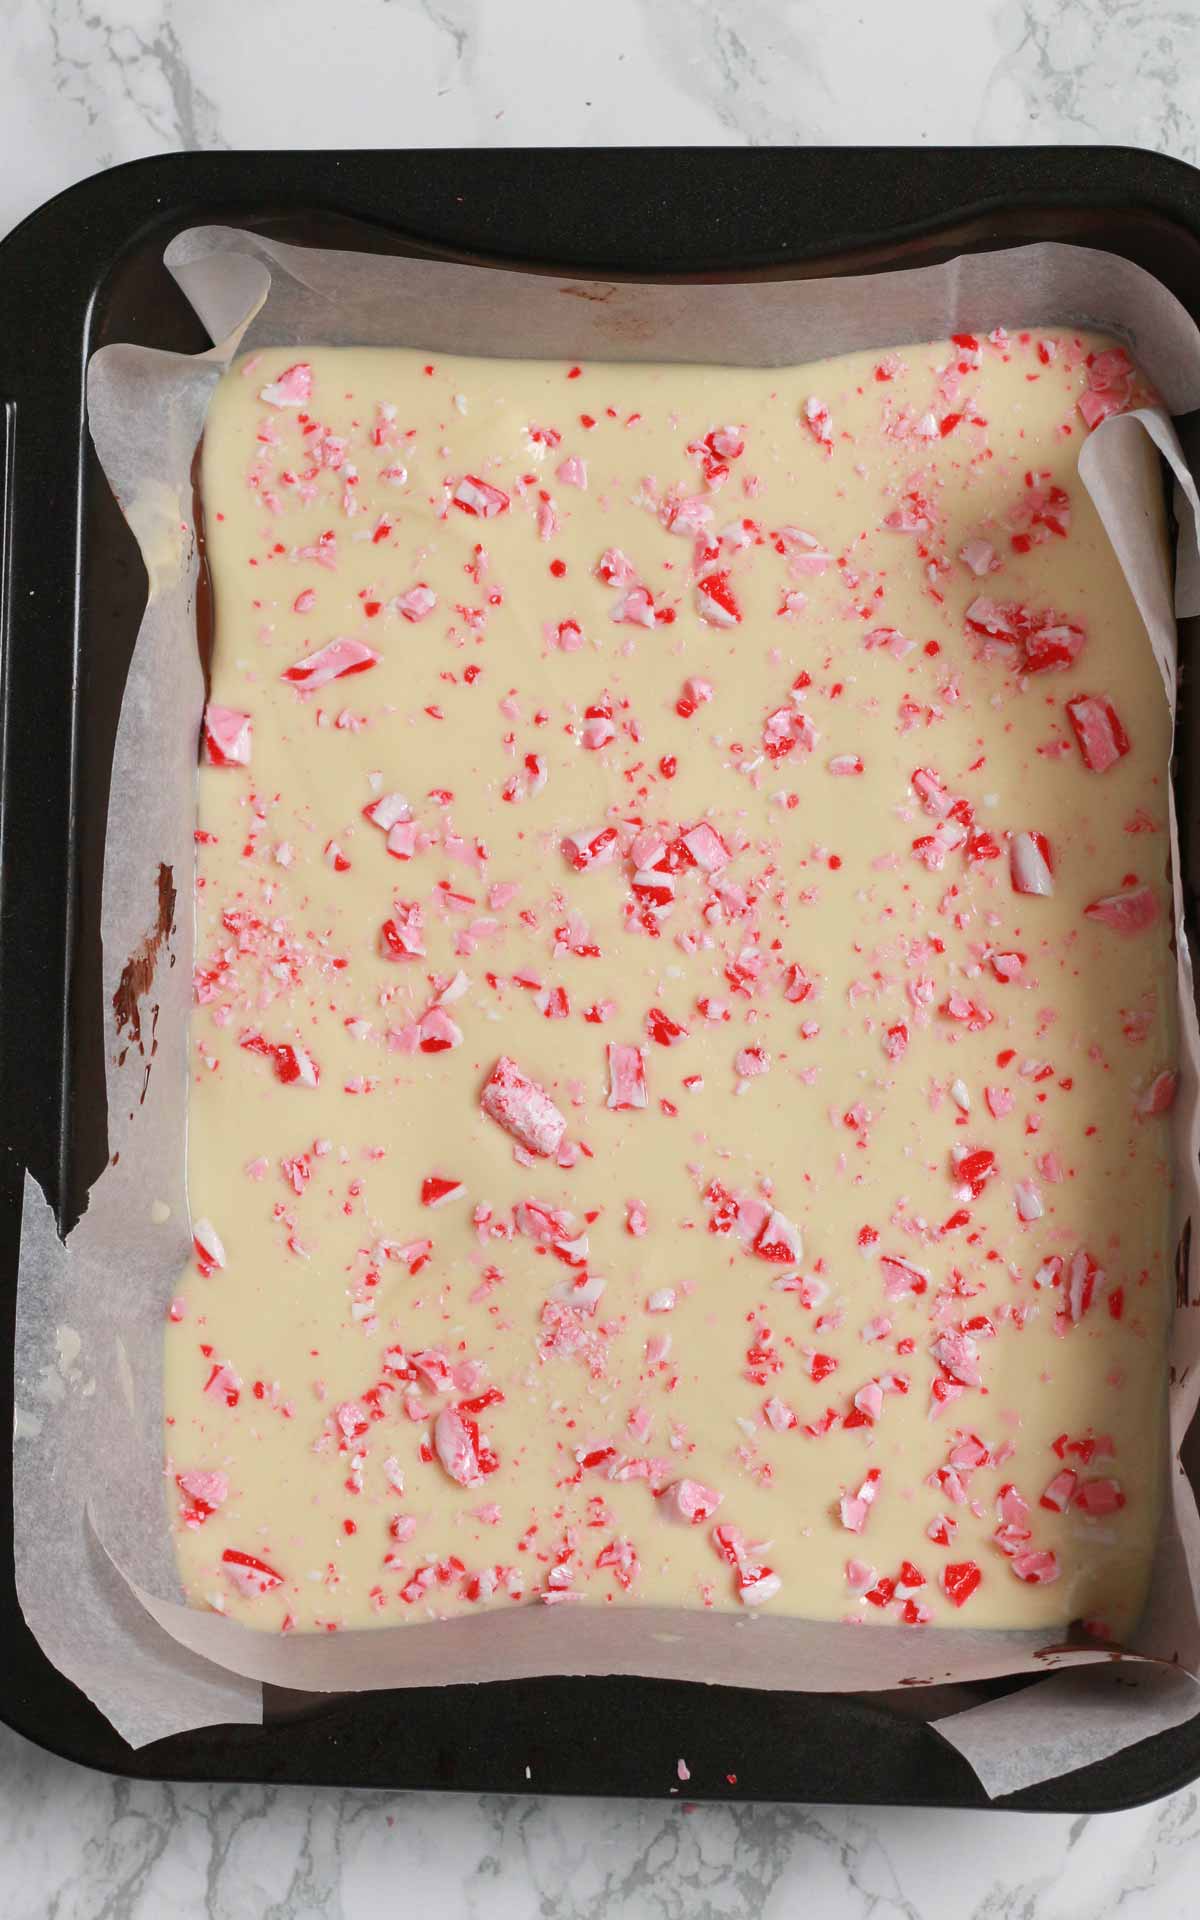 Melted dairy-free White Chocolate In Tin With Candy Cane Pieces On Top